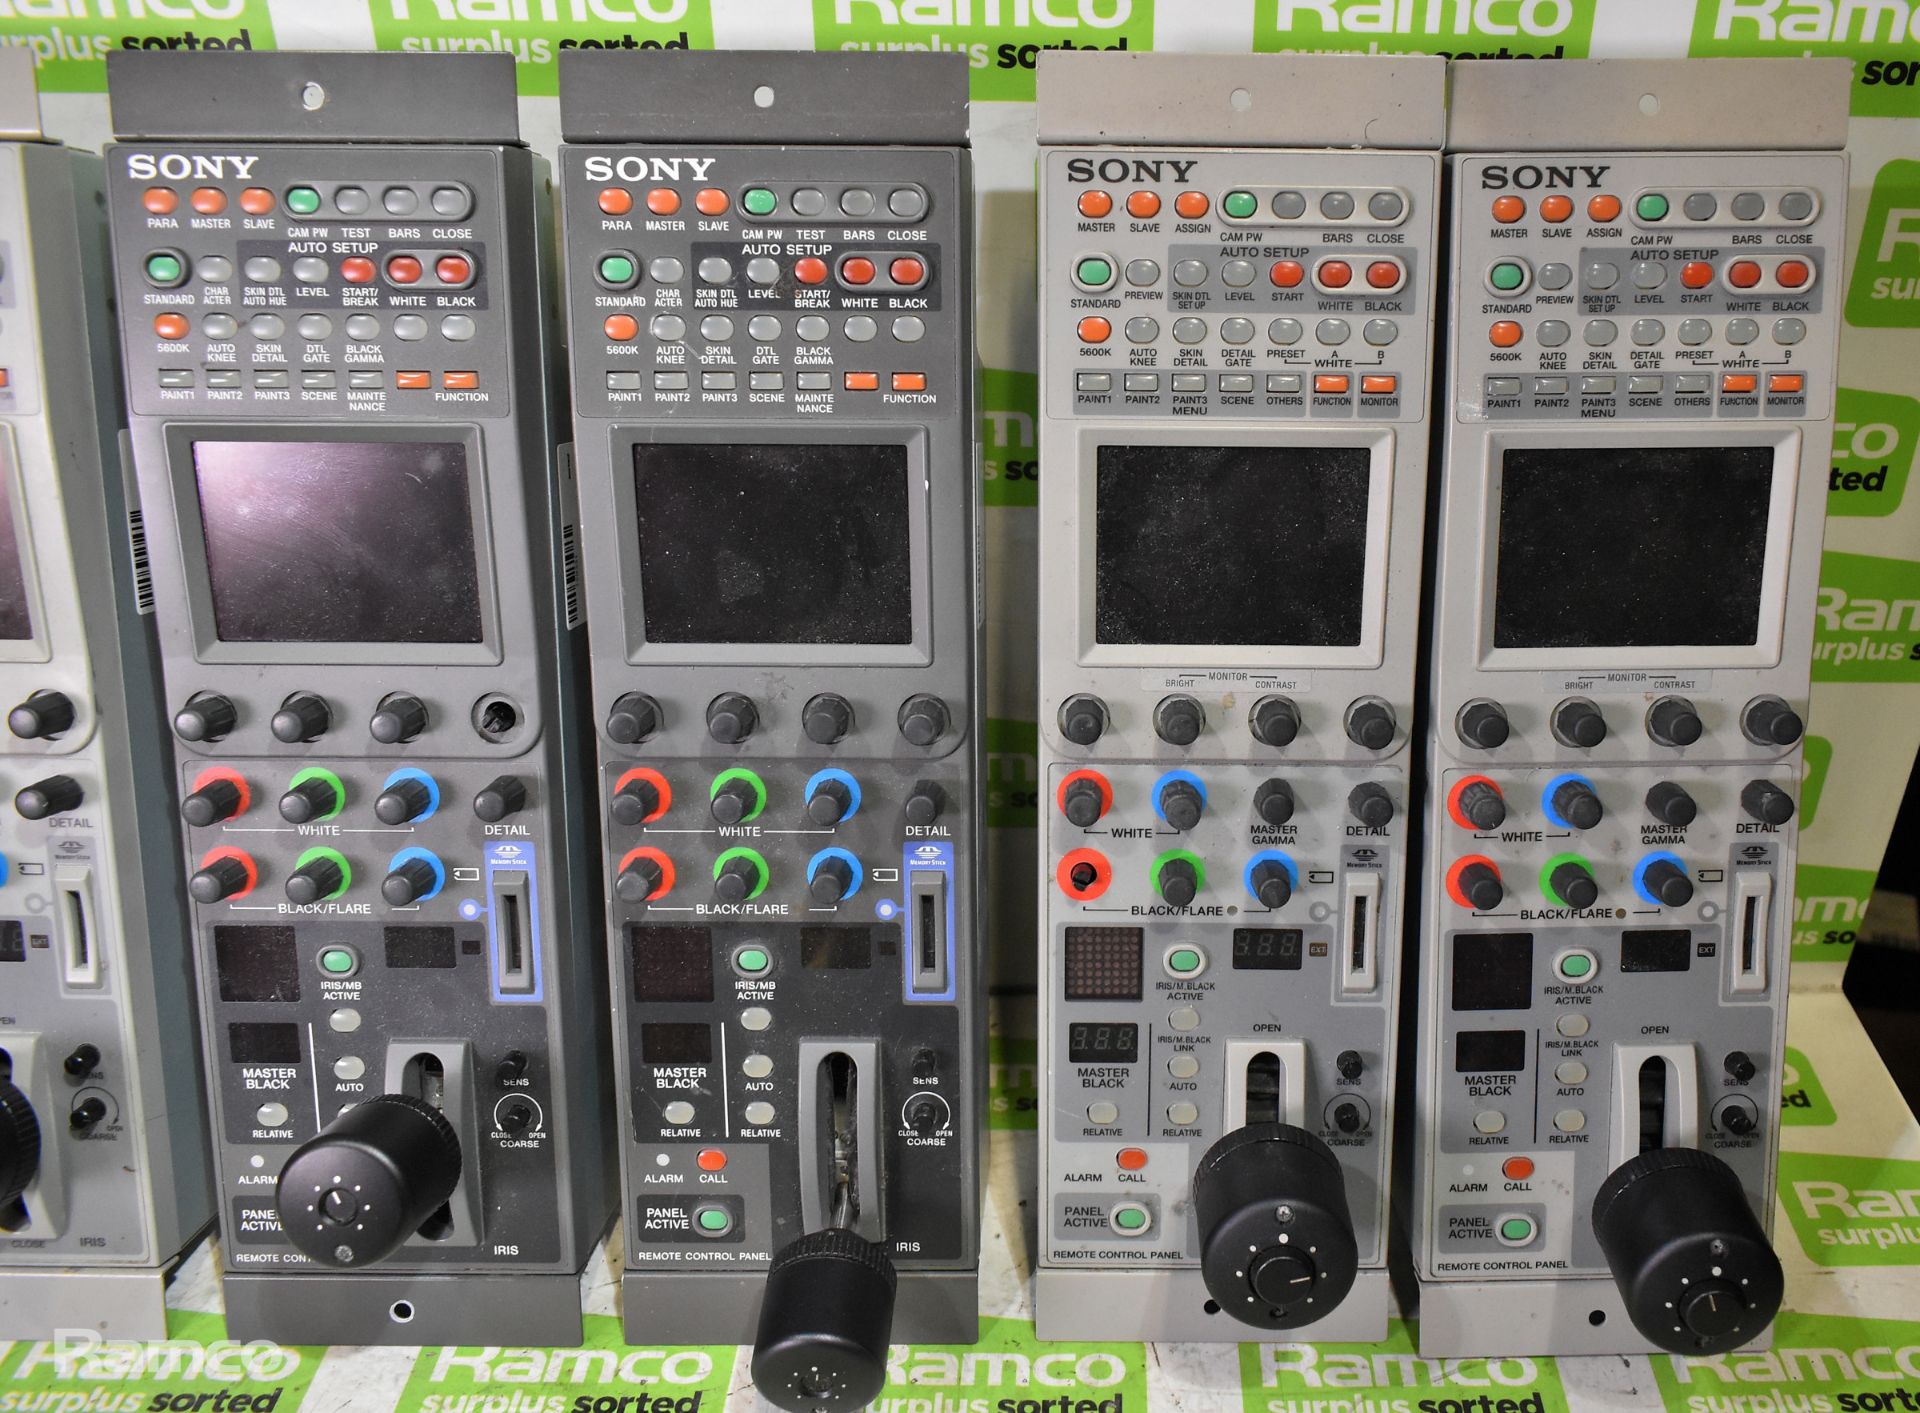 4x Sony RCP-D50 remote control panels, Sony RCP-D51 remote control panel, 2x Sony RCP-750 units - Image 3 of 15